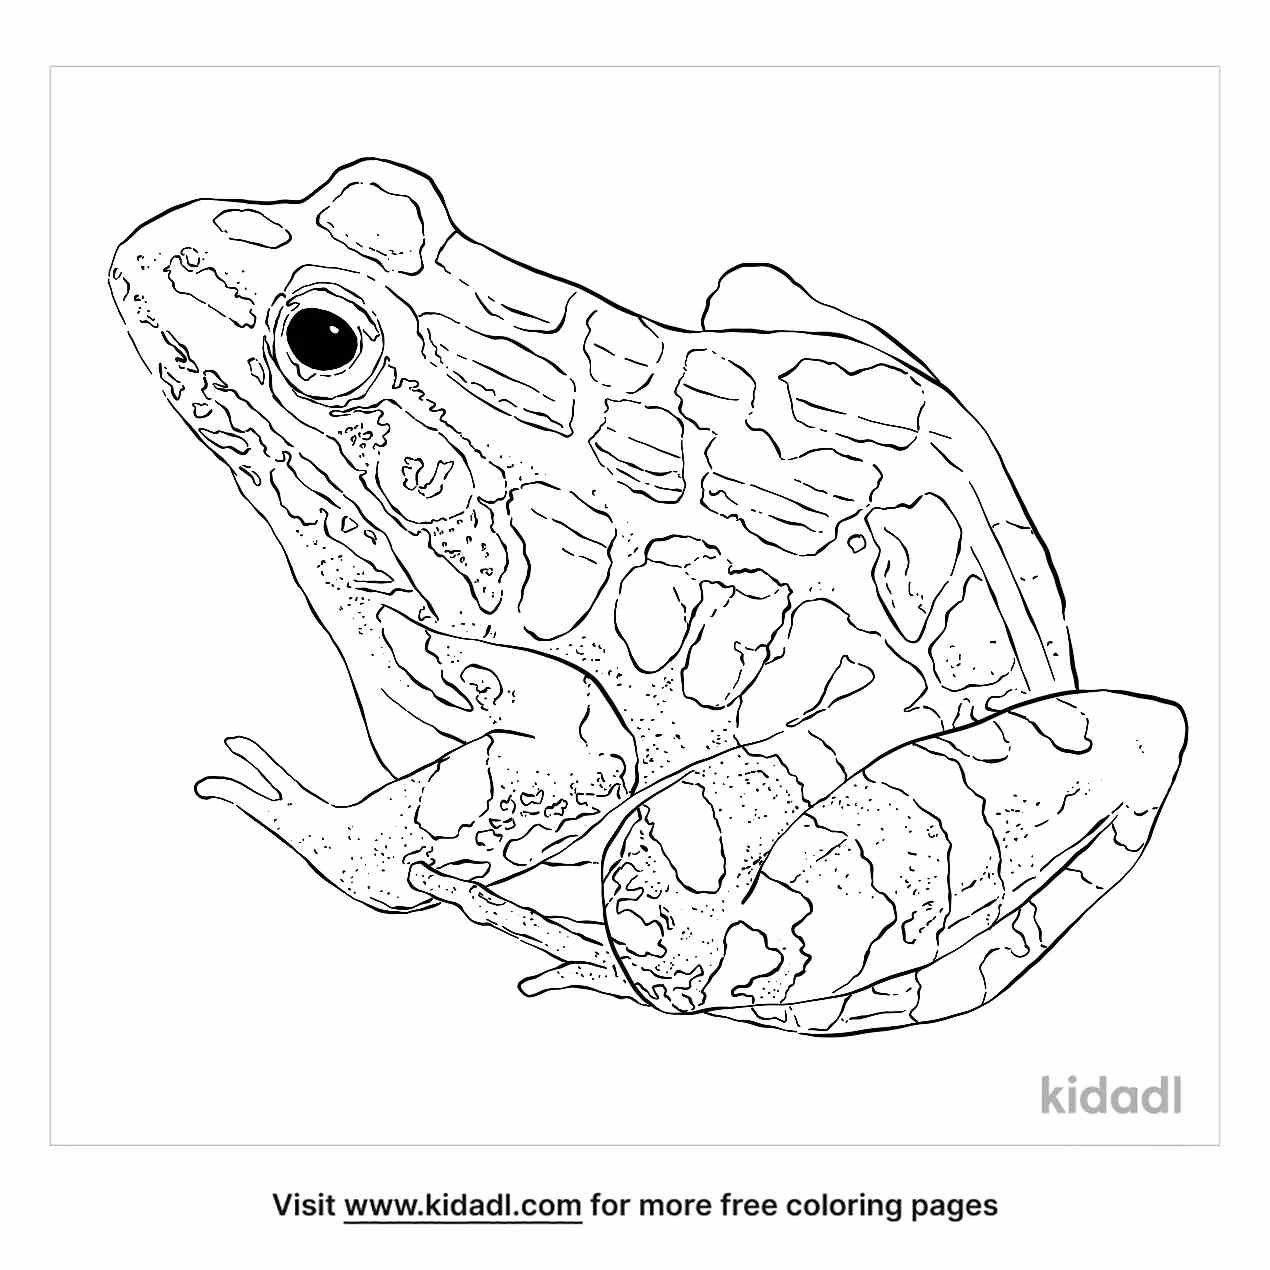 Have fun coloring this amazing pickerel frog.